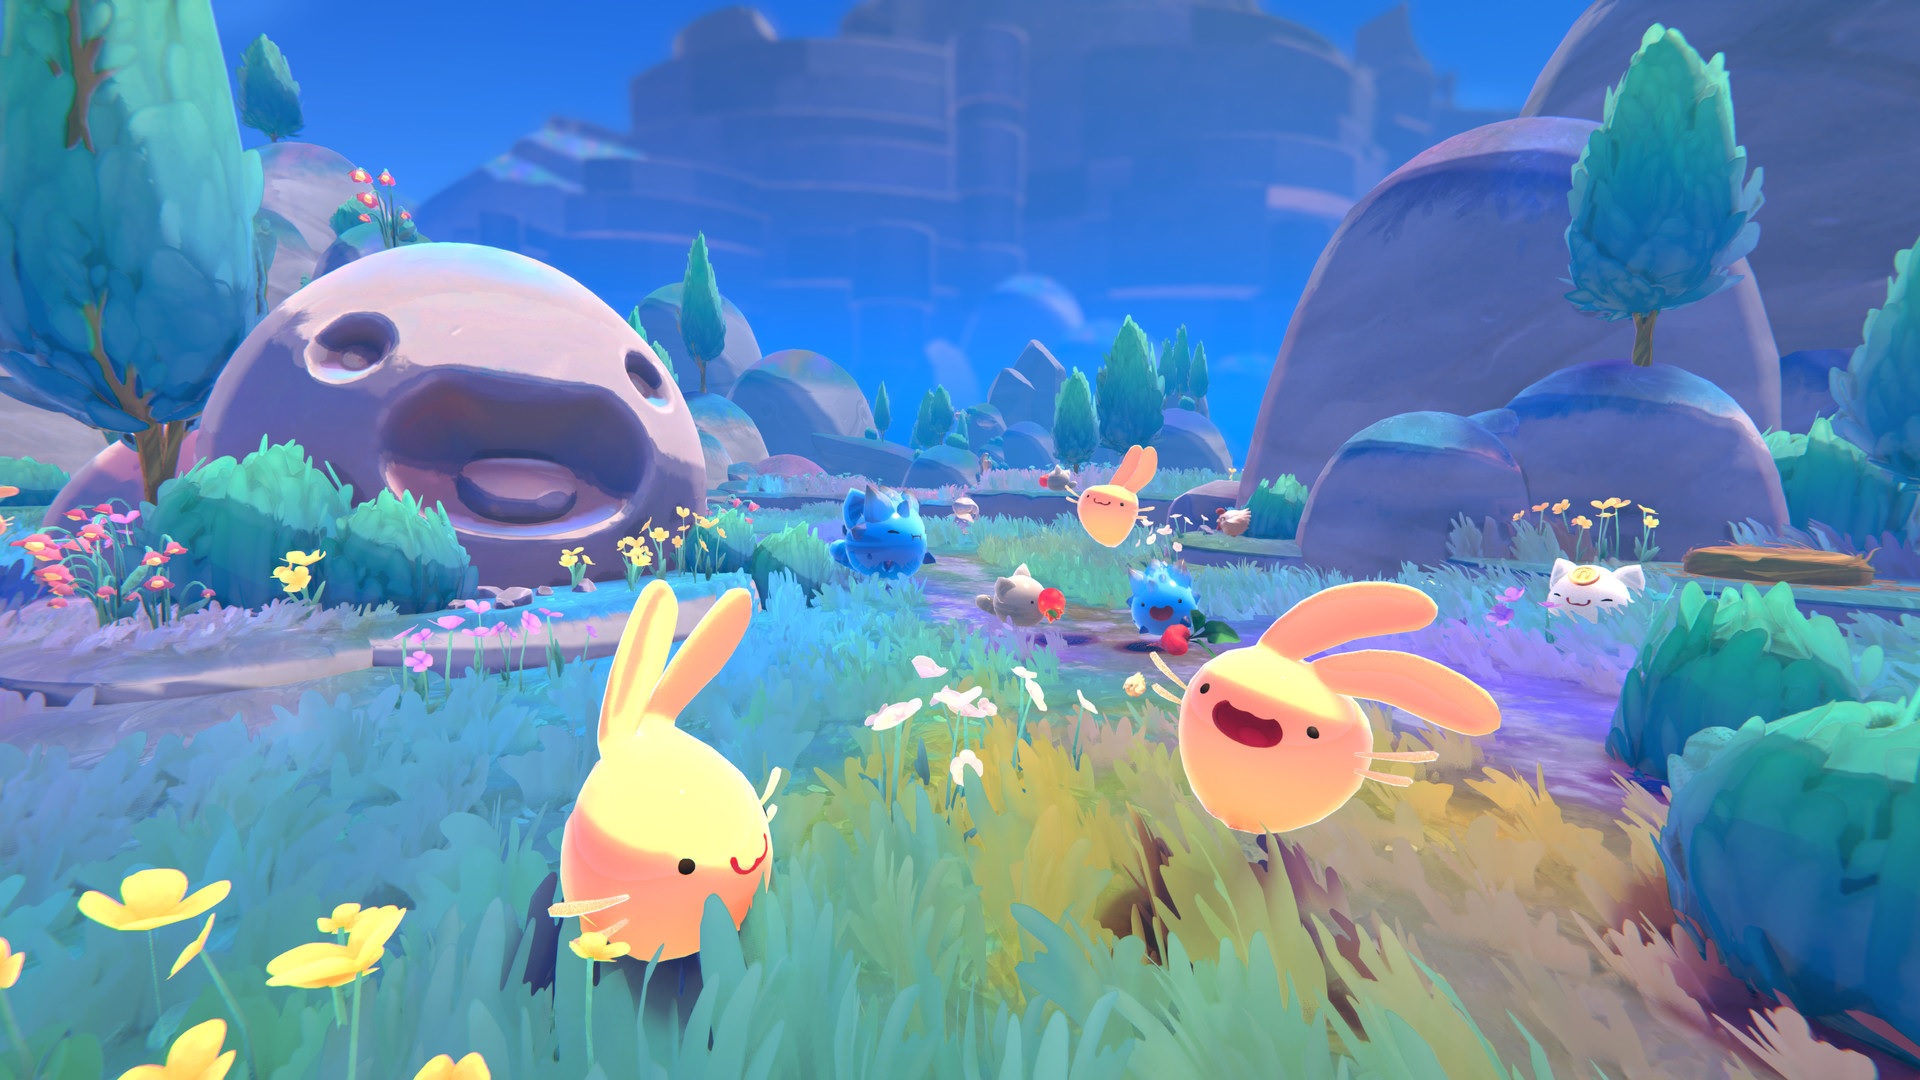 Slime Rancher 2 Early Access Impressions